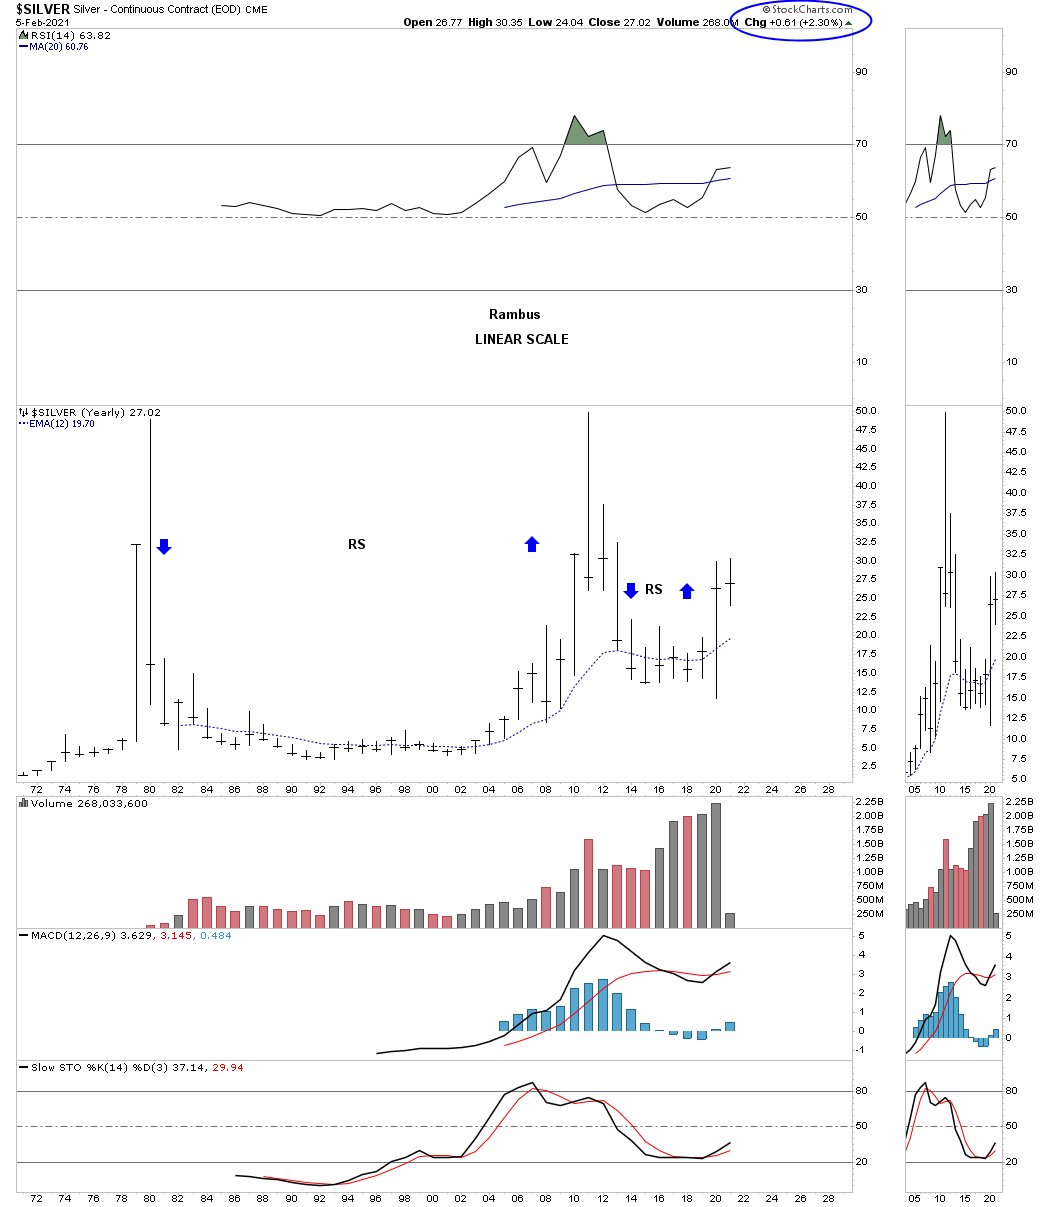 Silver Yearly Chart